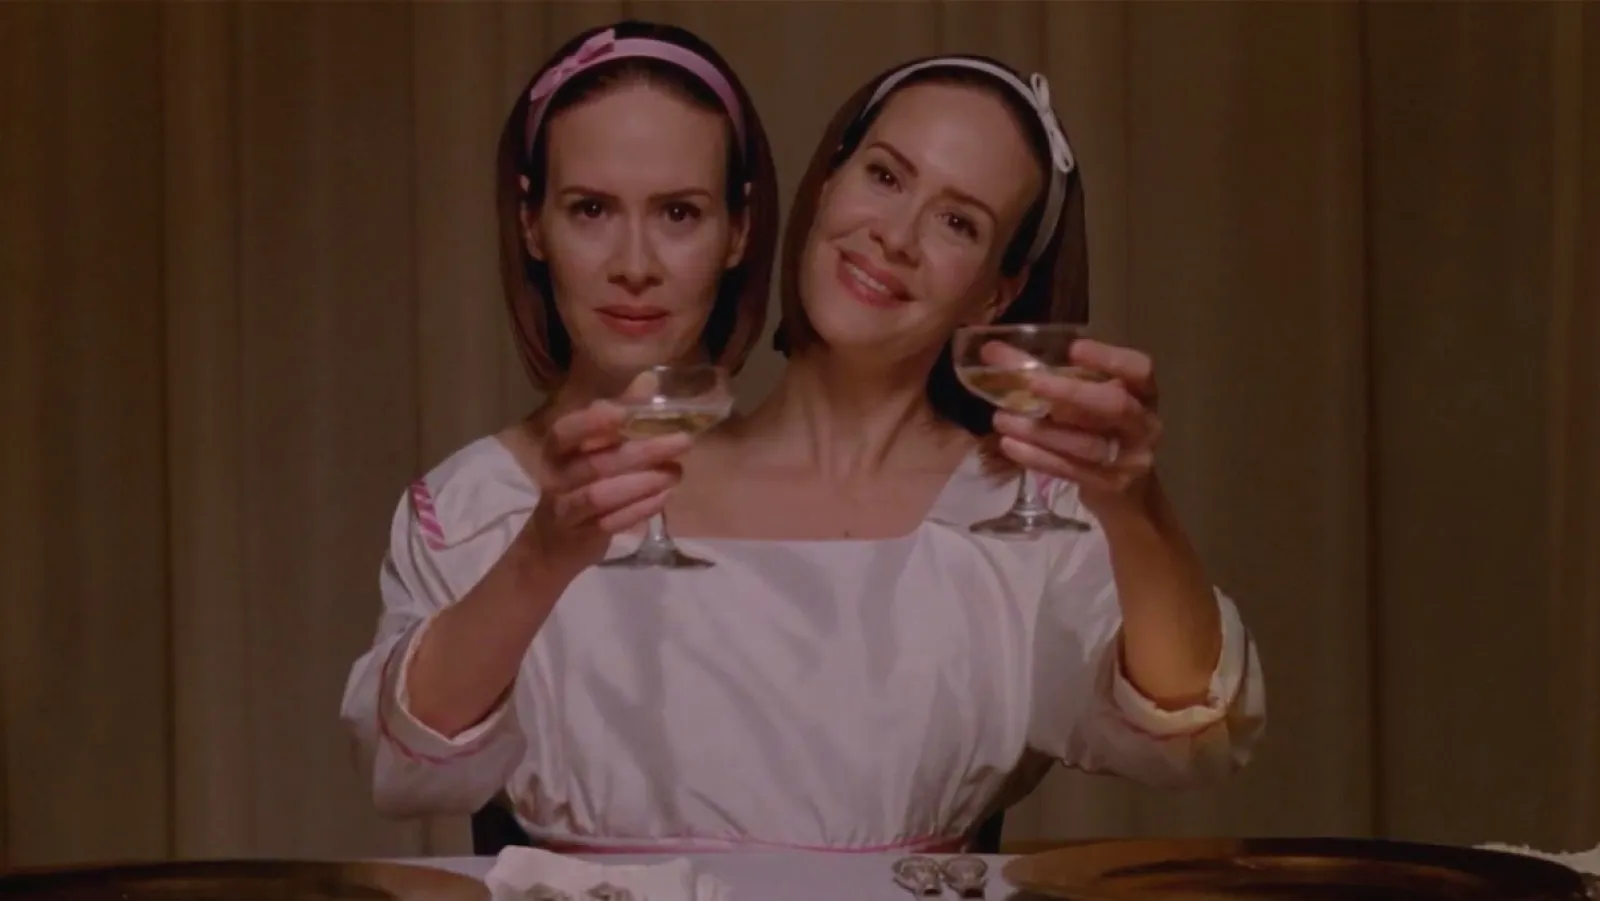 Sarah Paulson as Bette and Dot raising their glasses in American Horror Story: Freak Show